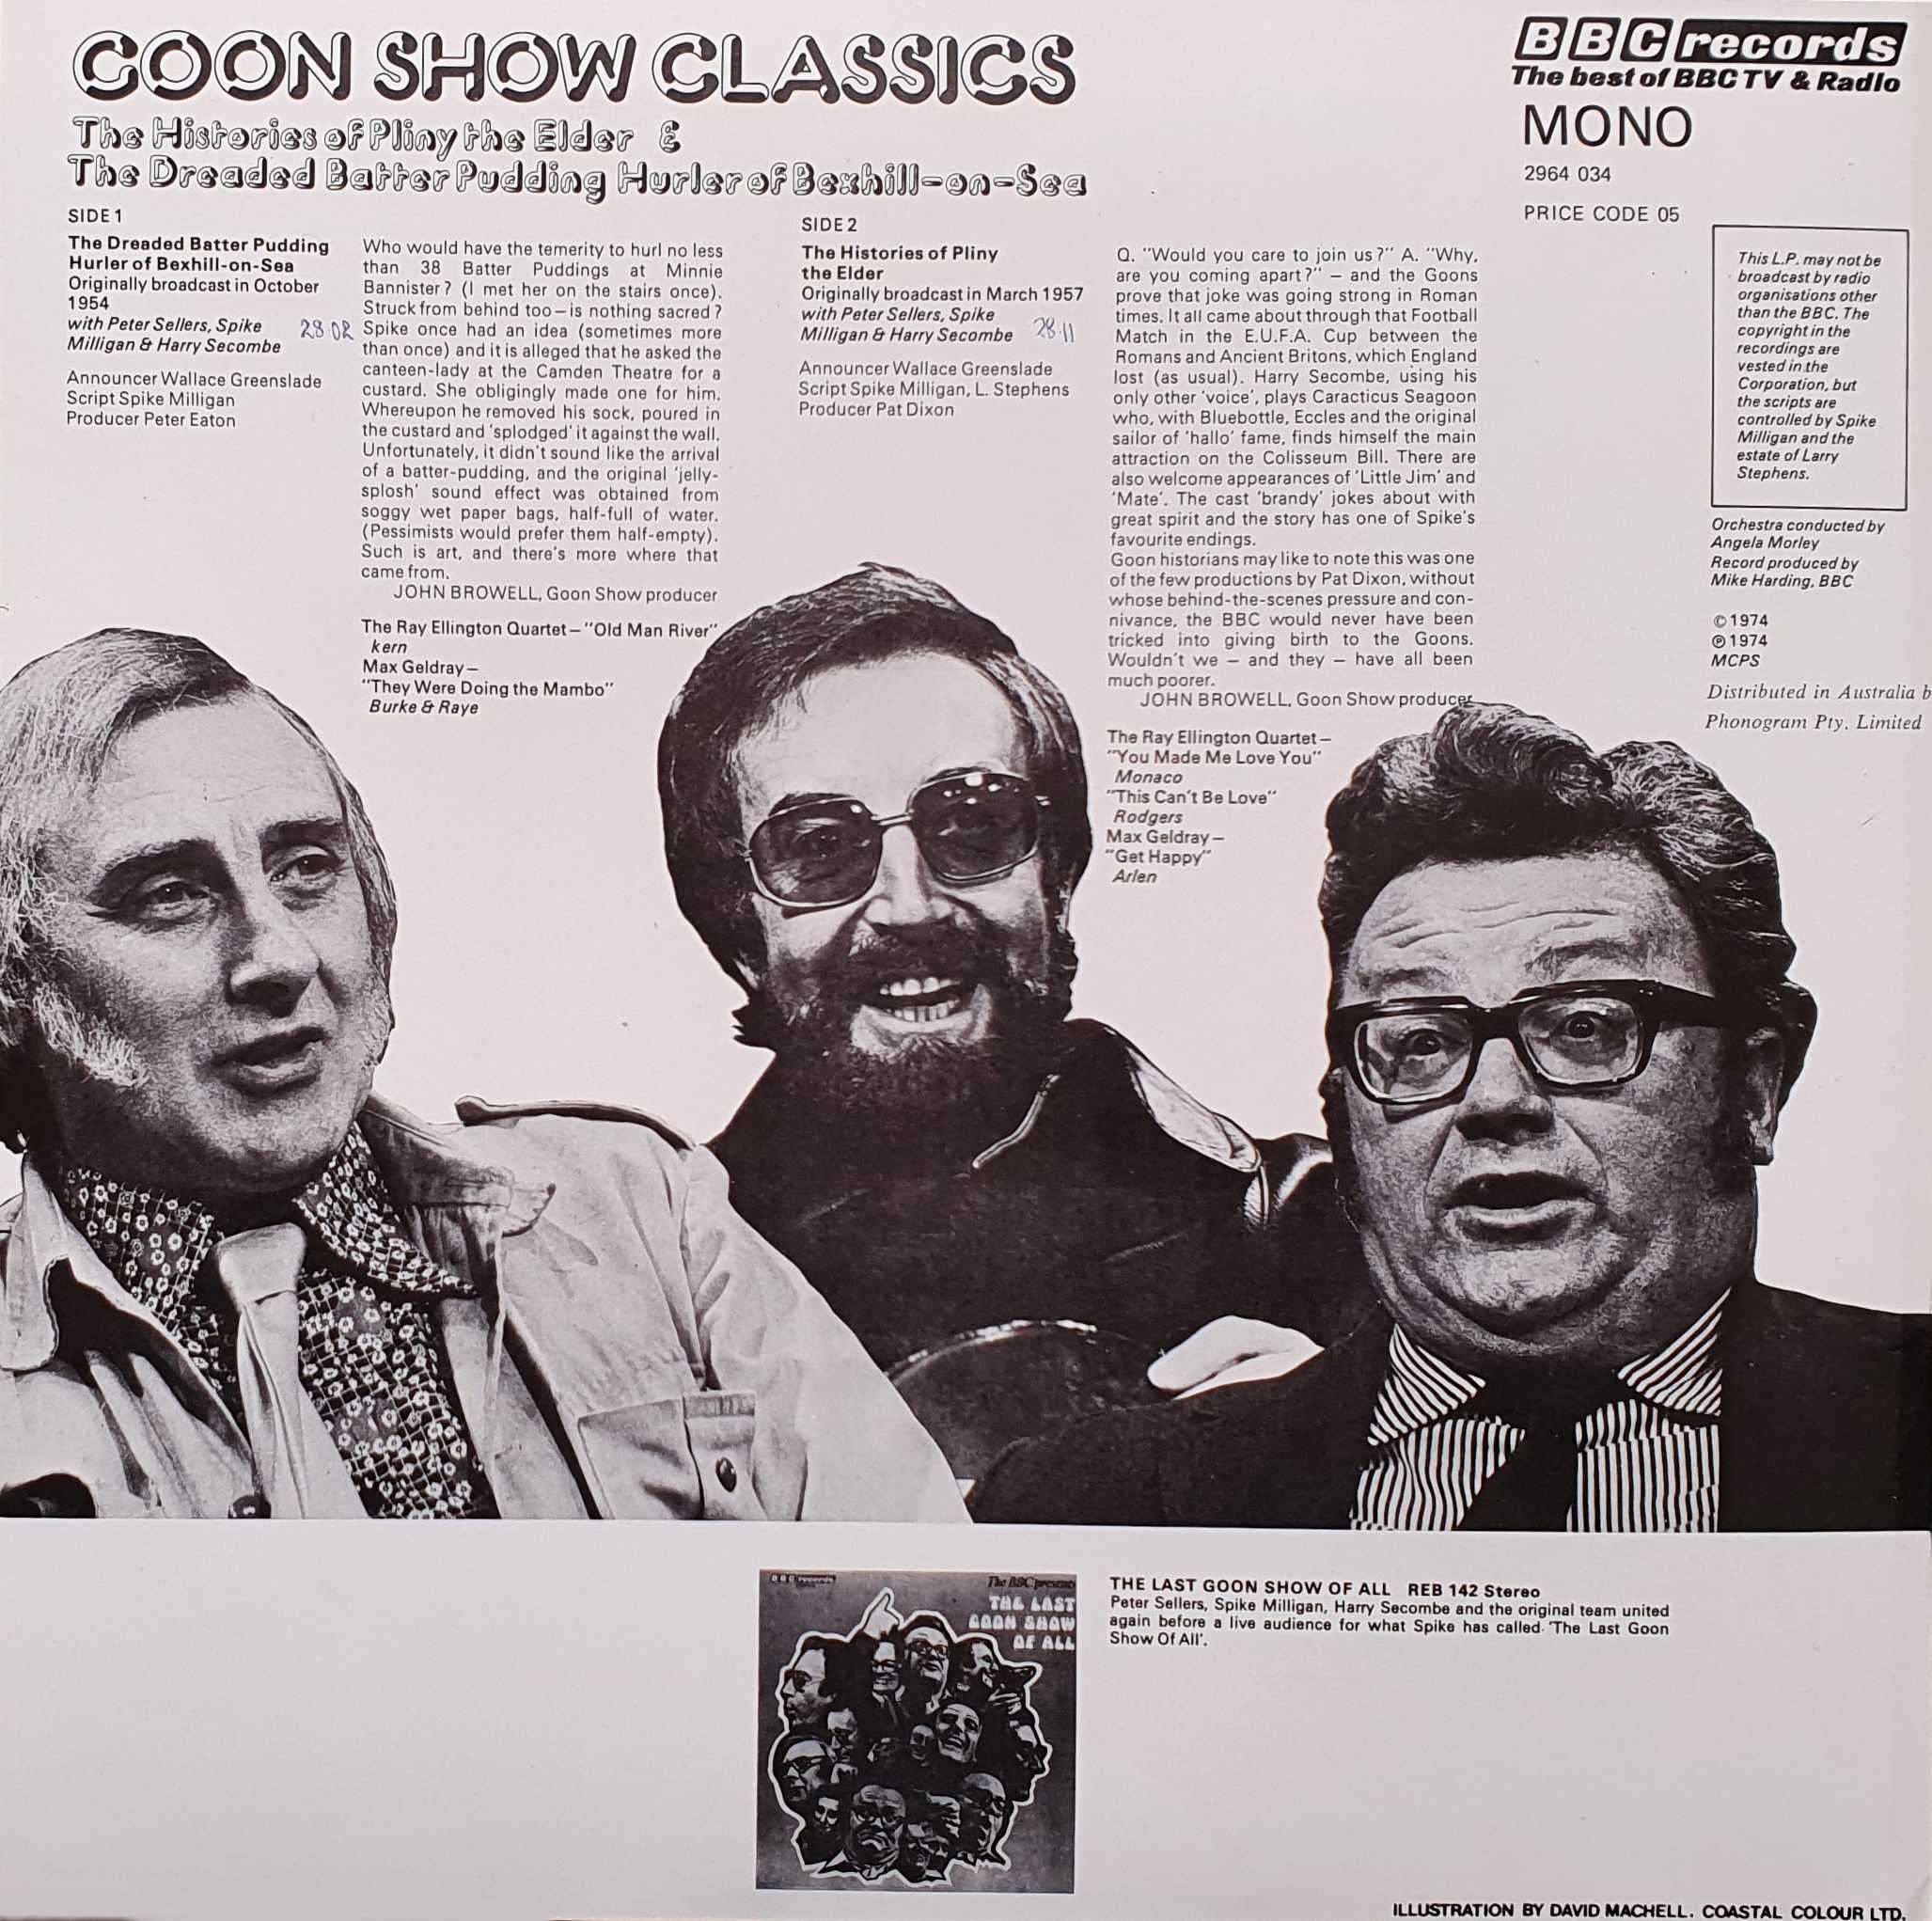 Picture of 2964 034 Goon Show Classics by artist The Goon Show from the BBC records and Tapes library